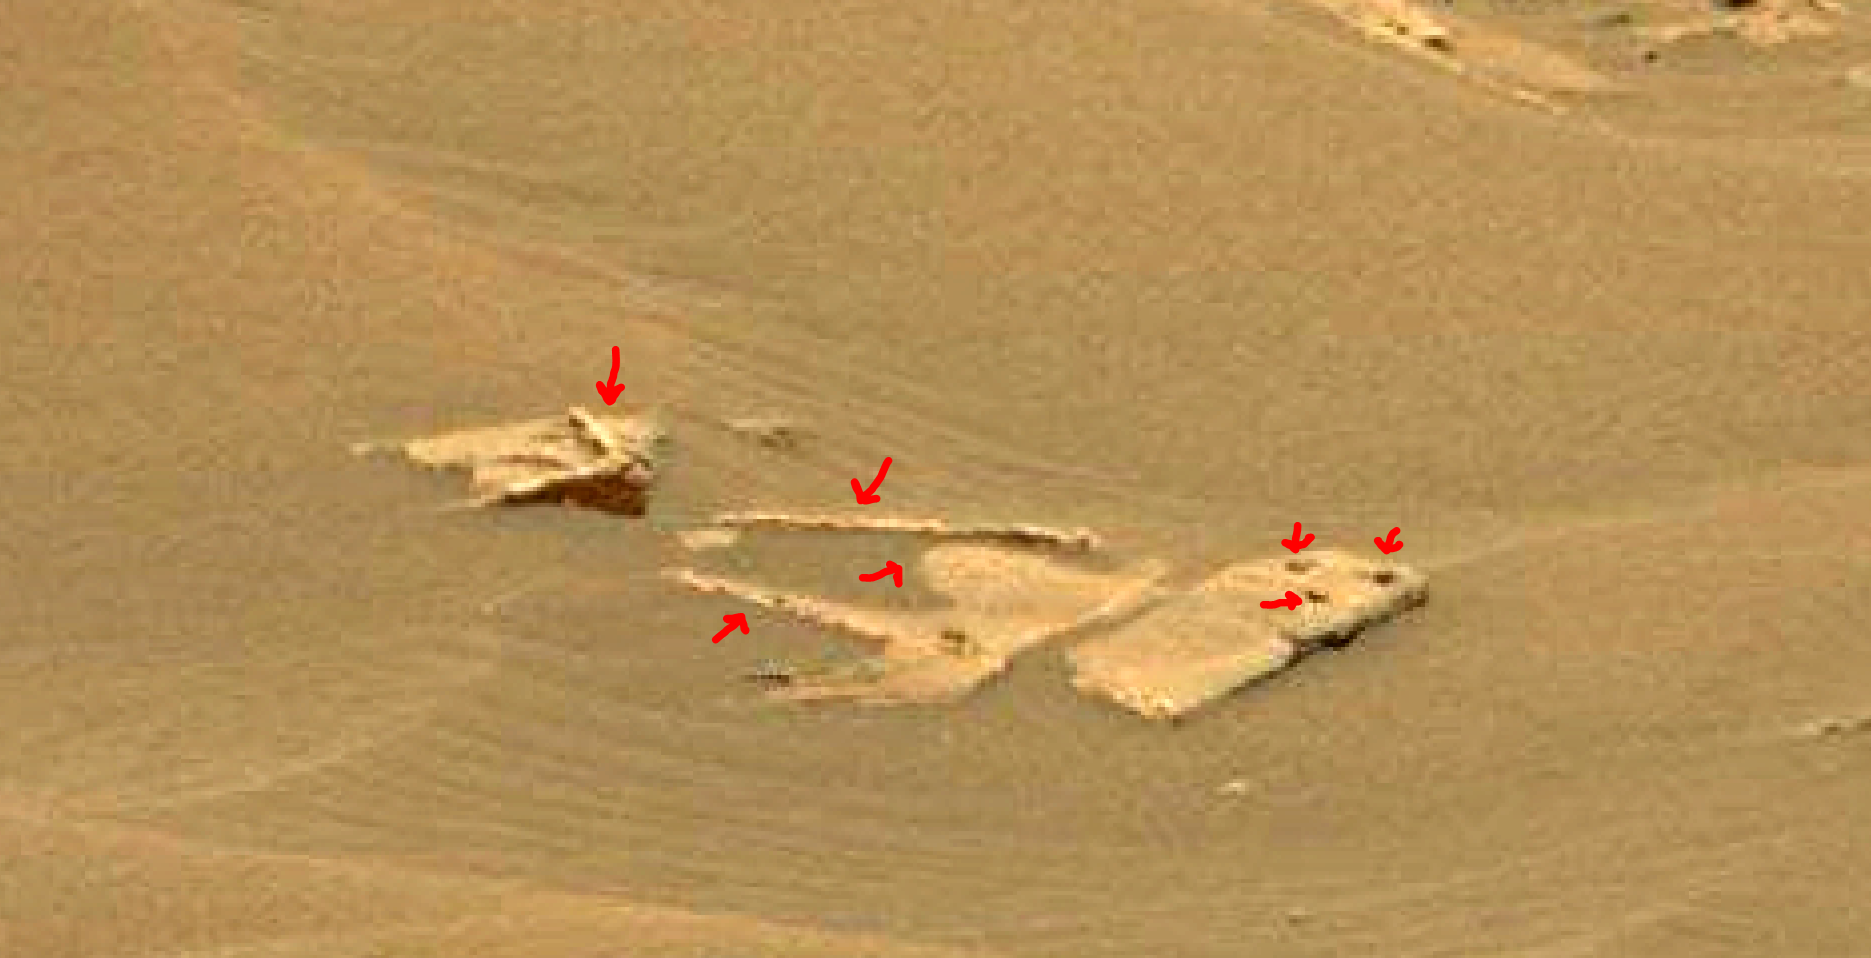 mars sol 1353 anomaly-artifacts 39a was life on mars